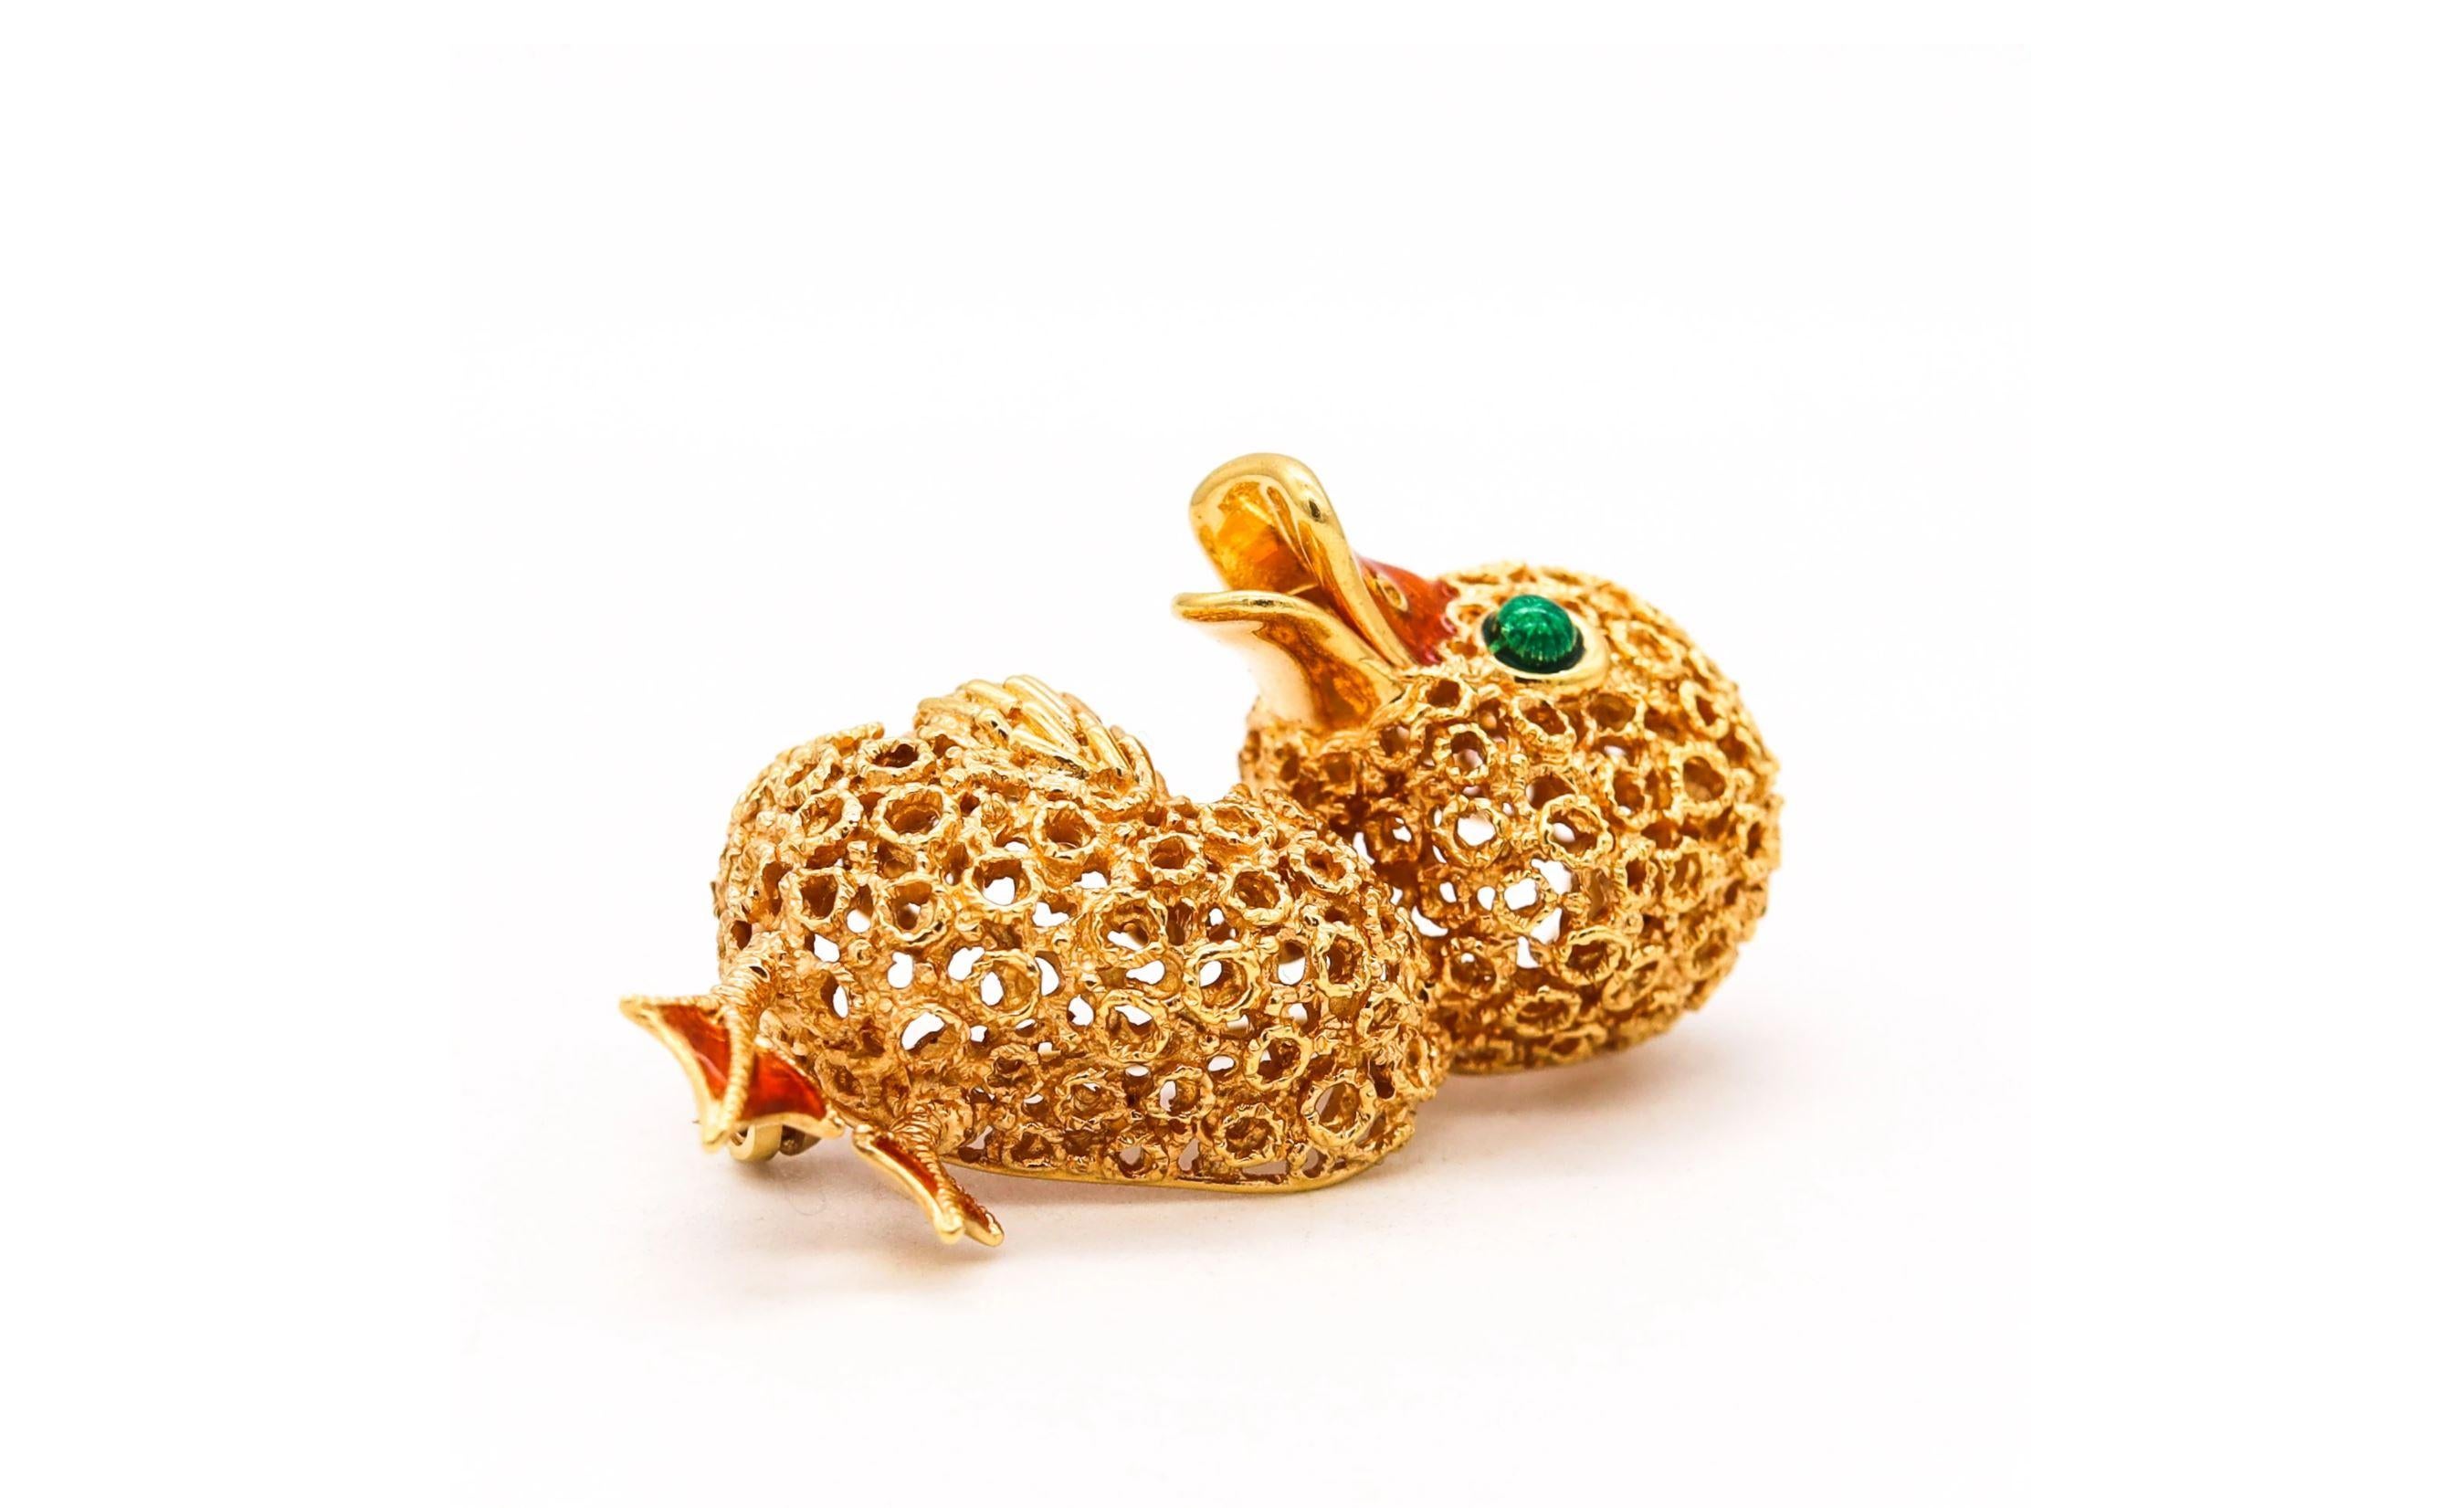 Happy duck brooch designed by Kutchinsky.

Beautiful and unusual piece, created in London, England by the famous jewelry house of Kutchinsky, back in the 1968. This handsome happy duck brooch was crafted in solid yellow gold of 18 karats, with